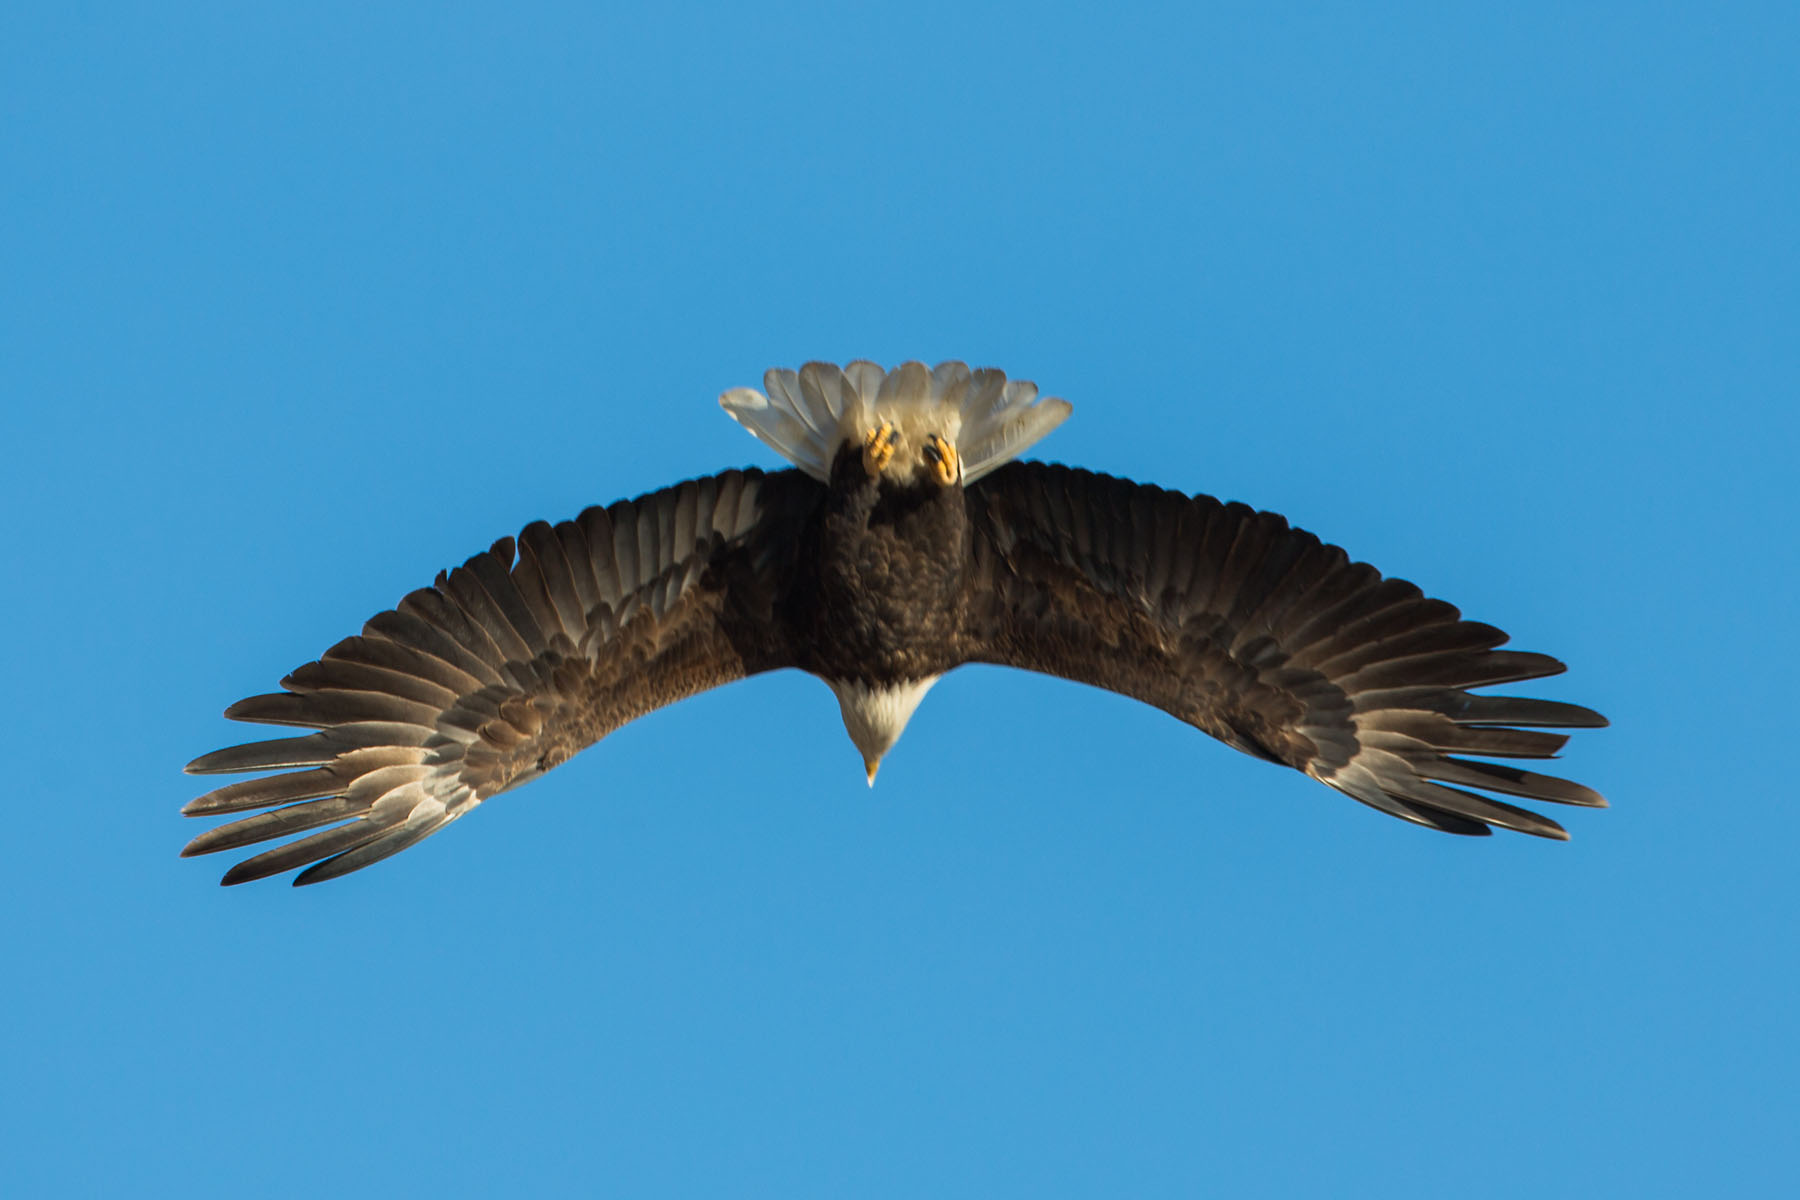 Bald Eagle from a different angle, showing wing detail, Loess Bluffs NWR.  Click for next photo.